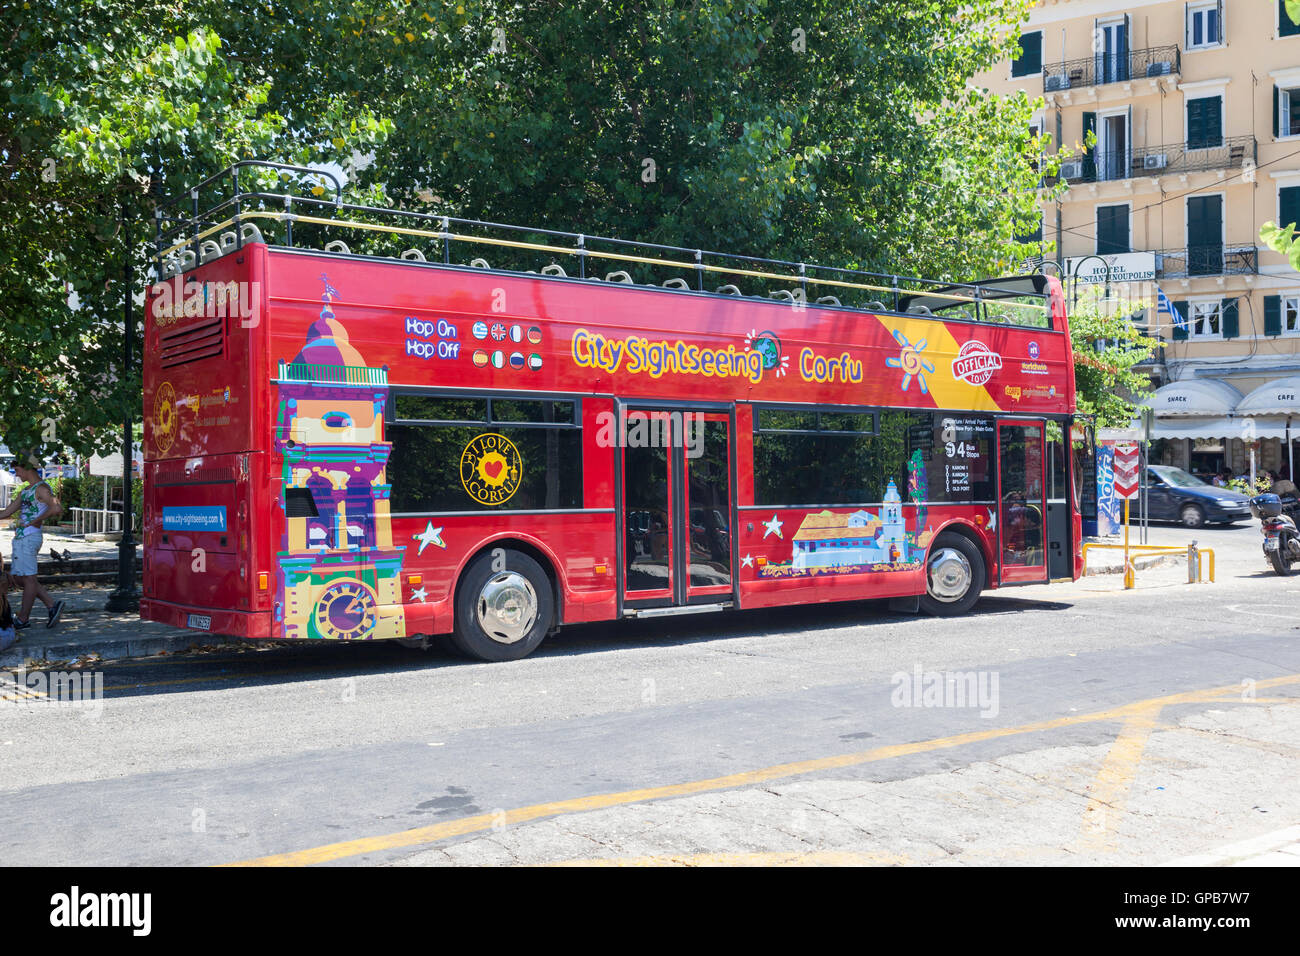 Red City Sightseeing bus parked in Corfu town, Corfu, Greece Stock Photo